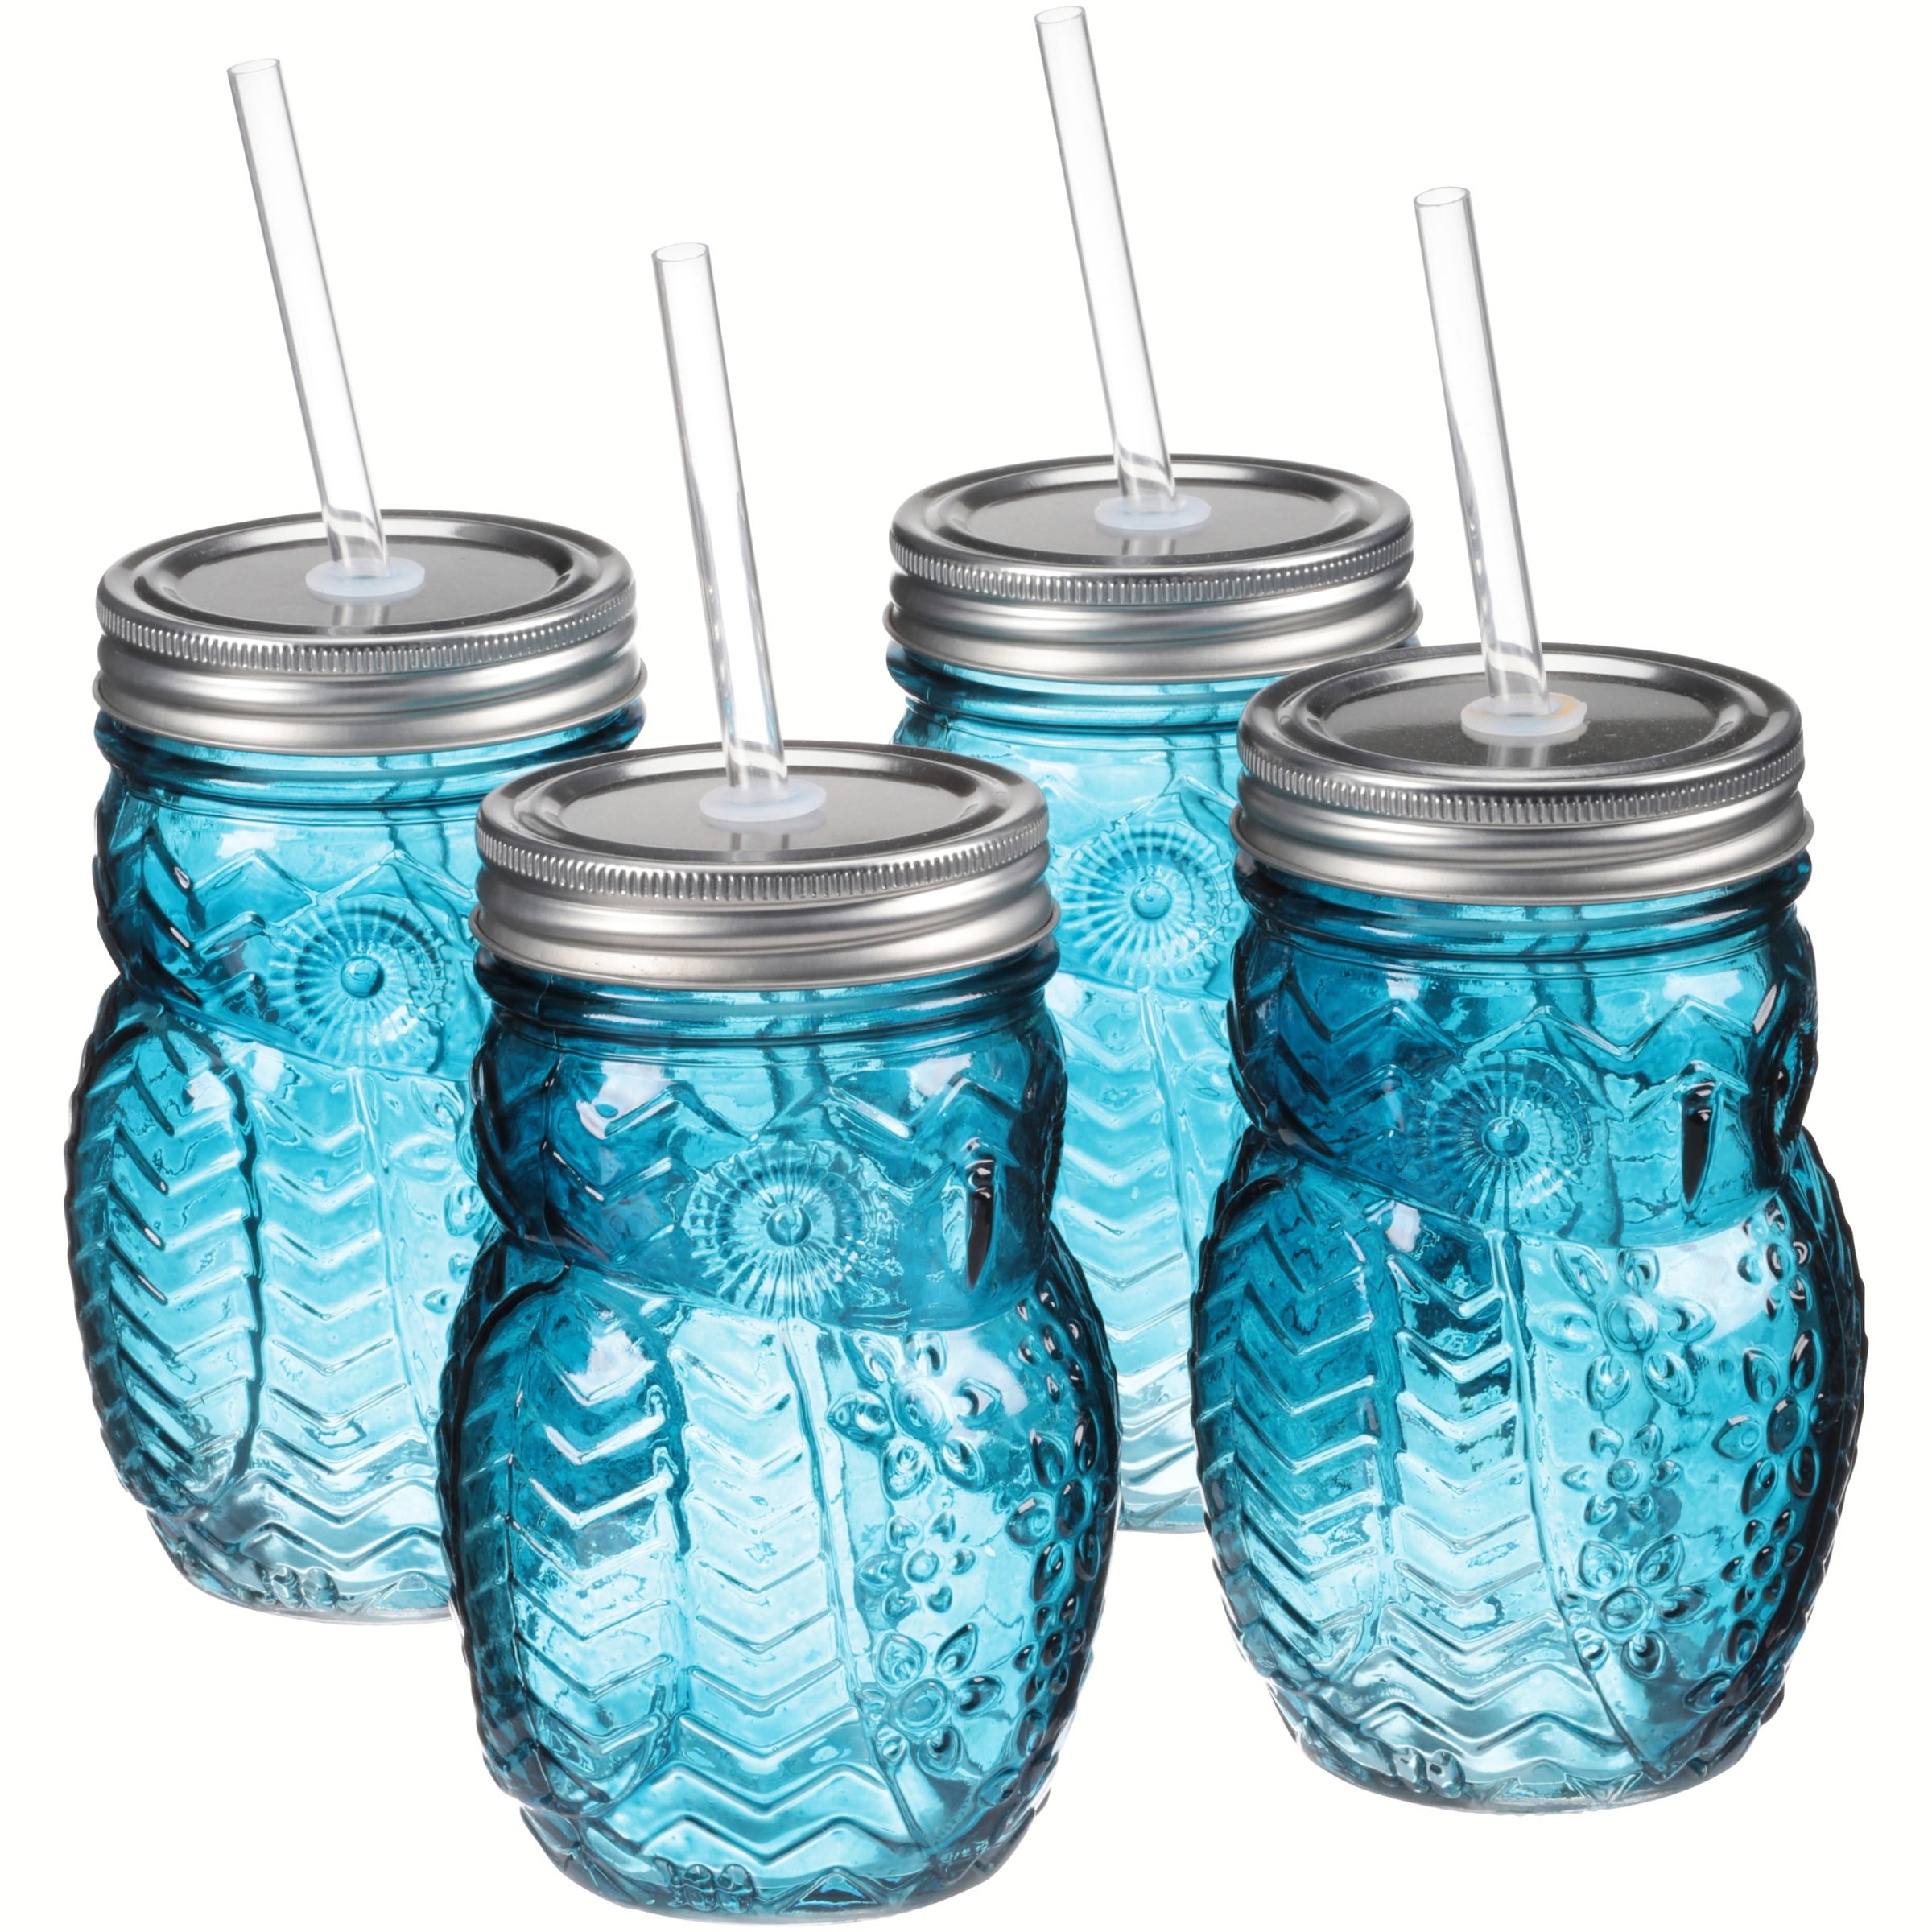 Glassware for Water Beer and Kitchen & Home Decor Dining Beverage Gifts 15 oz Clear Circleware 69052 Owl Mason Jars Drinking Glasses with Metal Lids and Hard Plastic Straws Set of 4